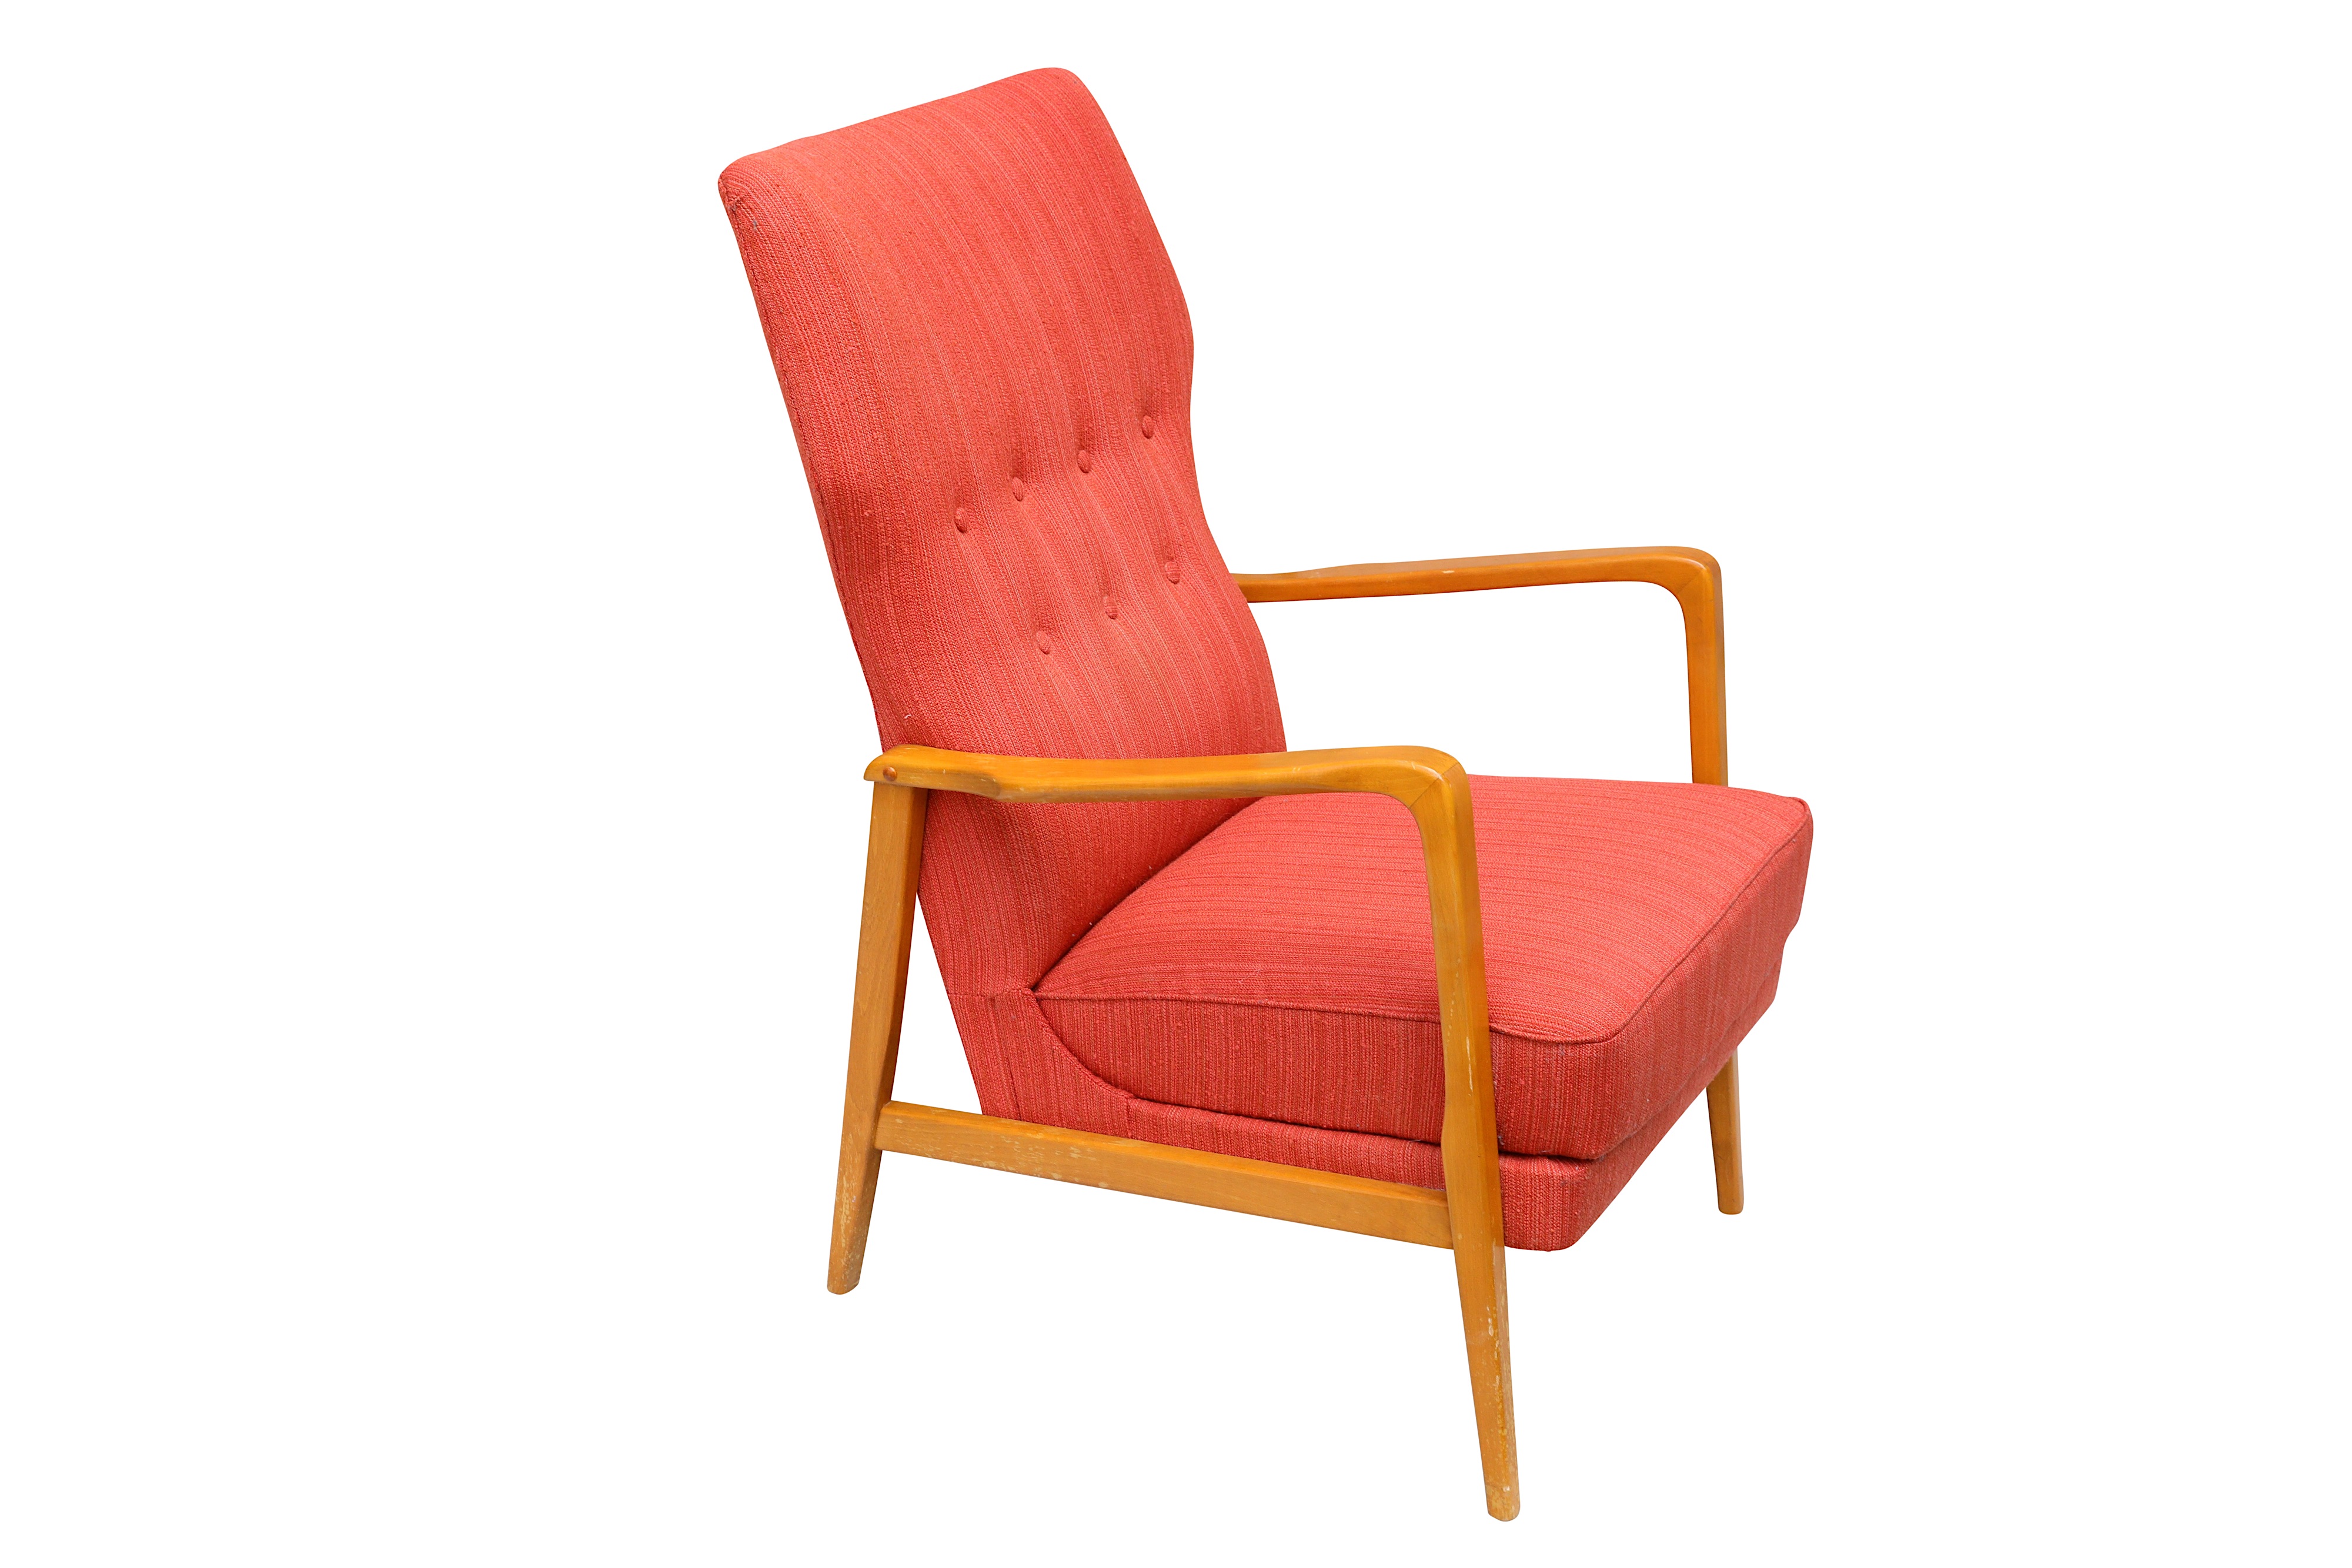 SWEDEN: An Armchair, c.1960, beech frame, pink buttoned upholstery - Image 2 of 2